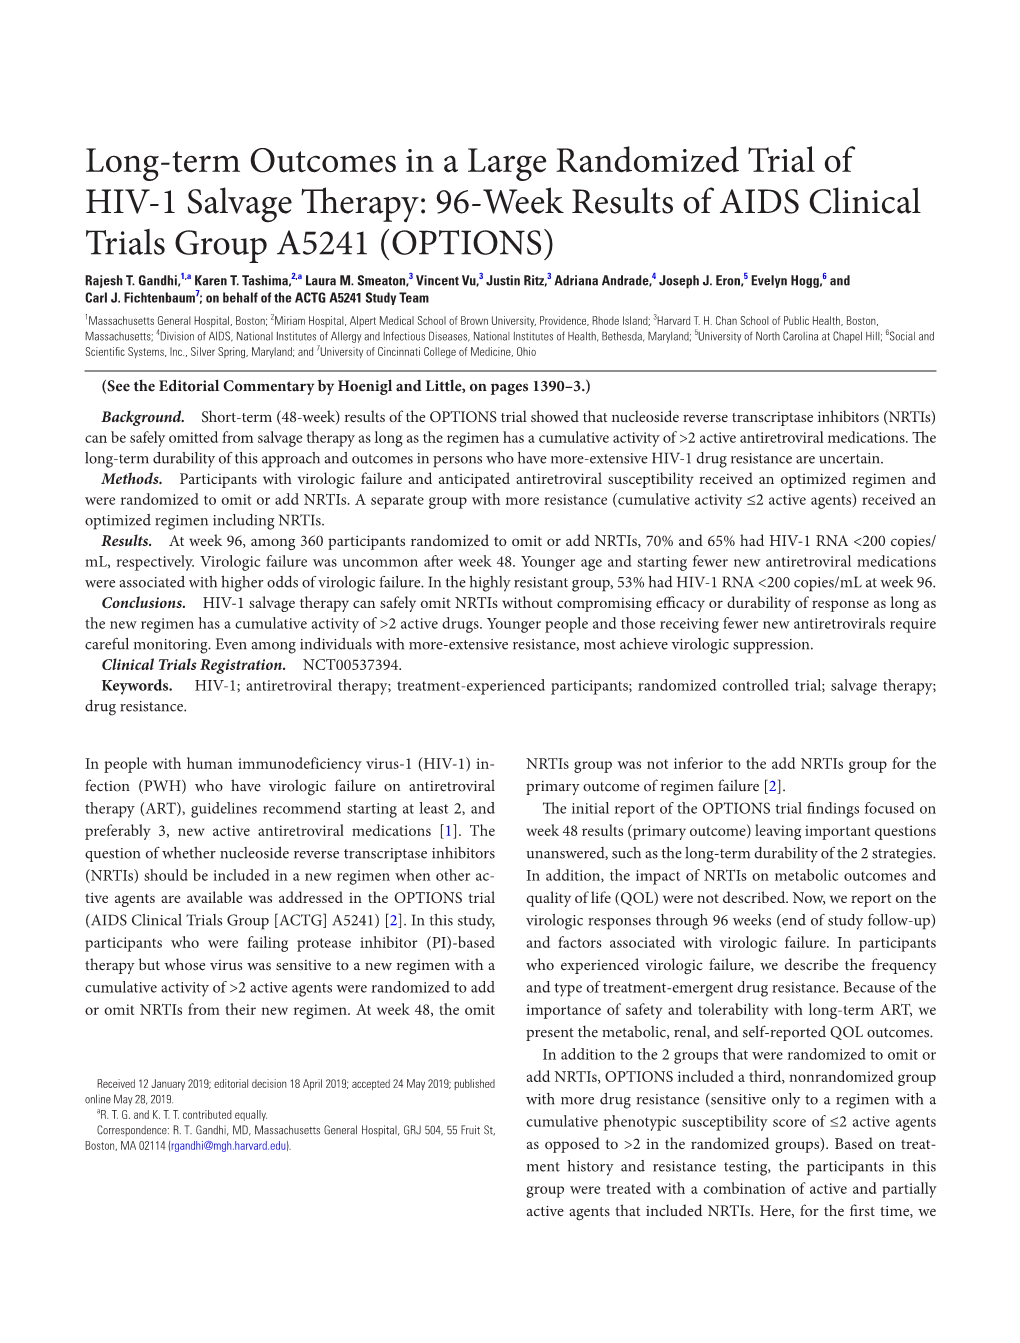 Long-Term Outcomes in a Large Randomized Trial of HIV-1 Salvage Therapy: 96-Week Results of AIDS Clinical Trials Group A5241 (OPTIONS) Rajesh T